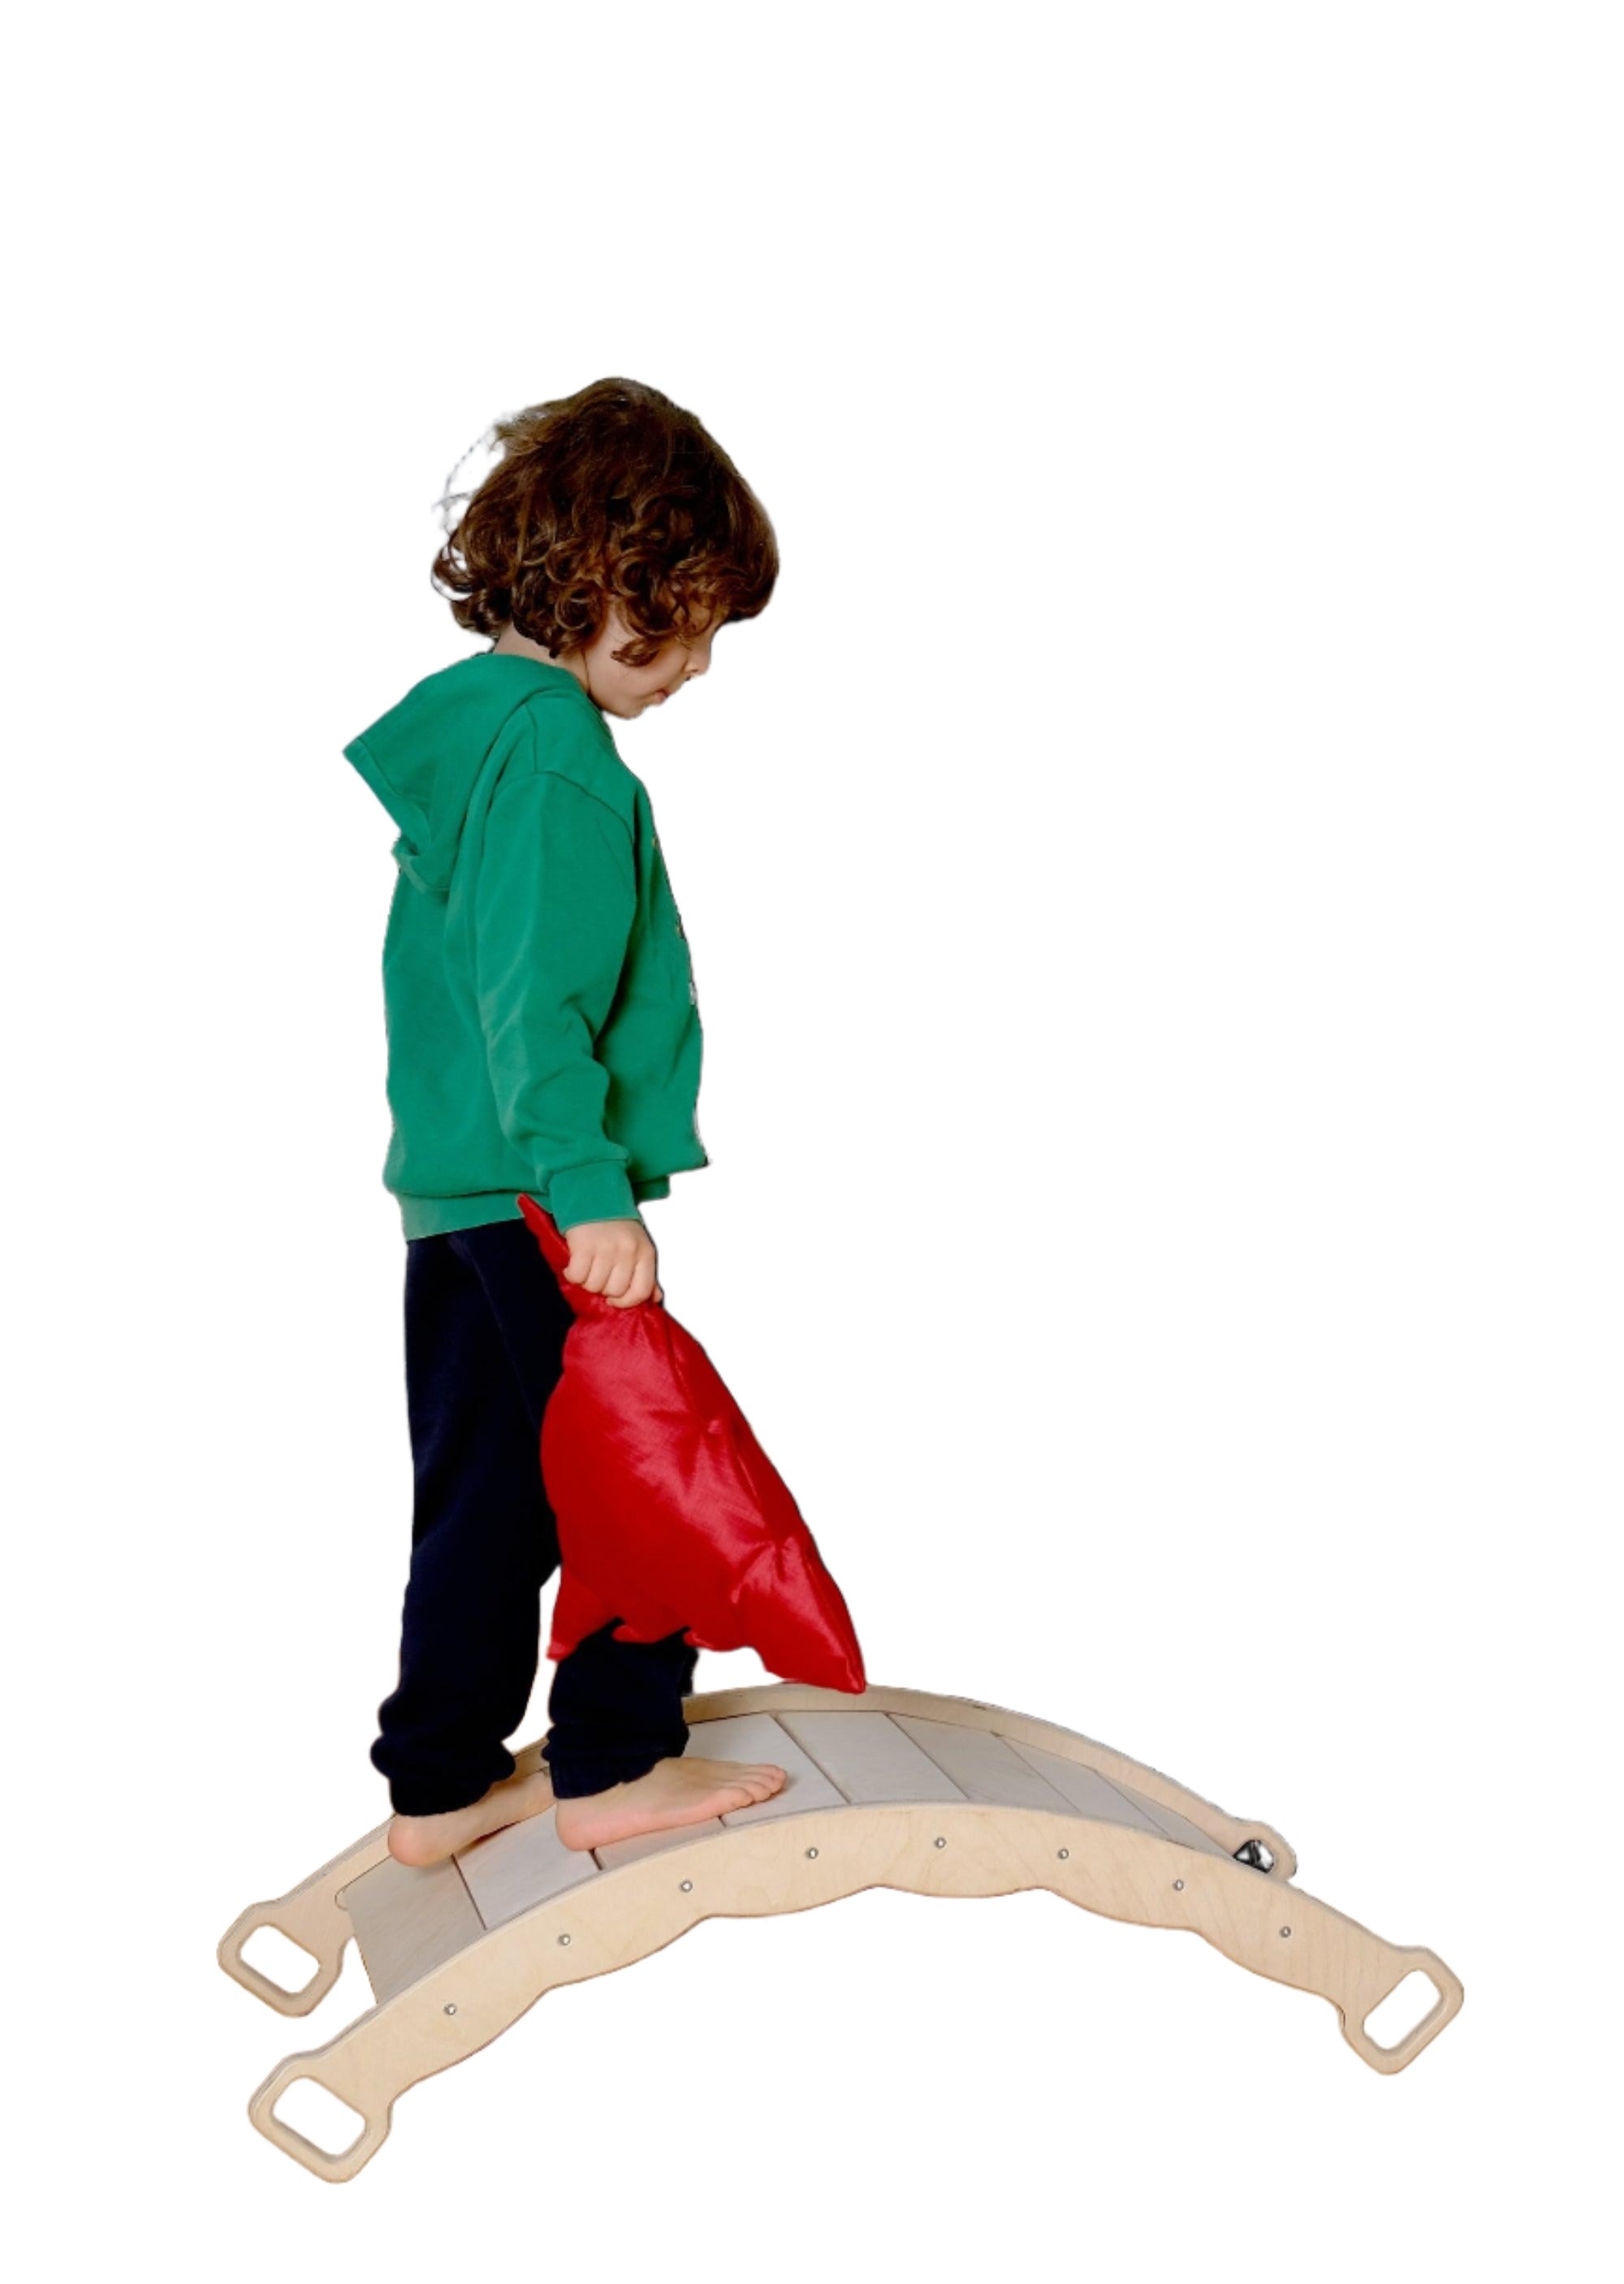 Xl Wooden Balance Board For Toddlers Montessori Balance Toy With Pillow